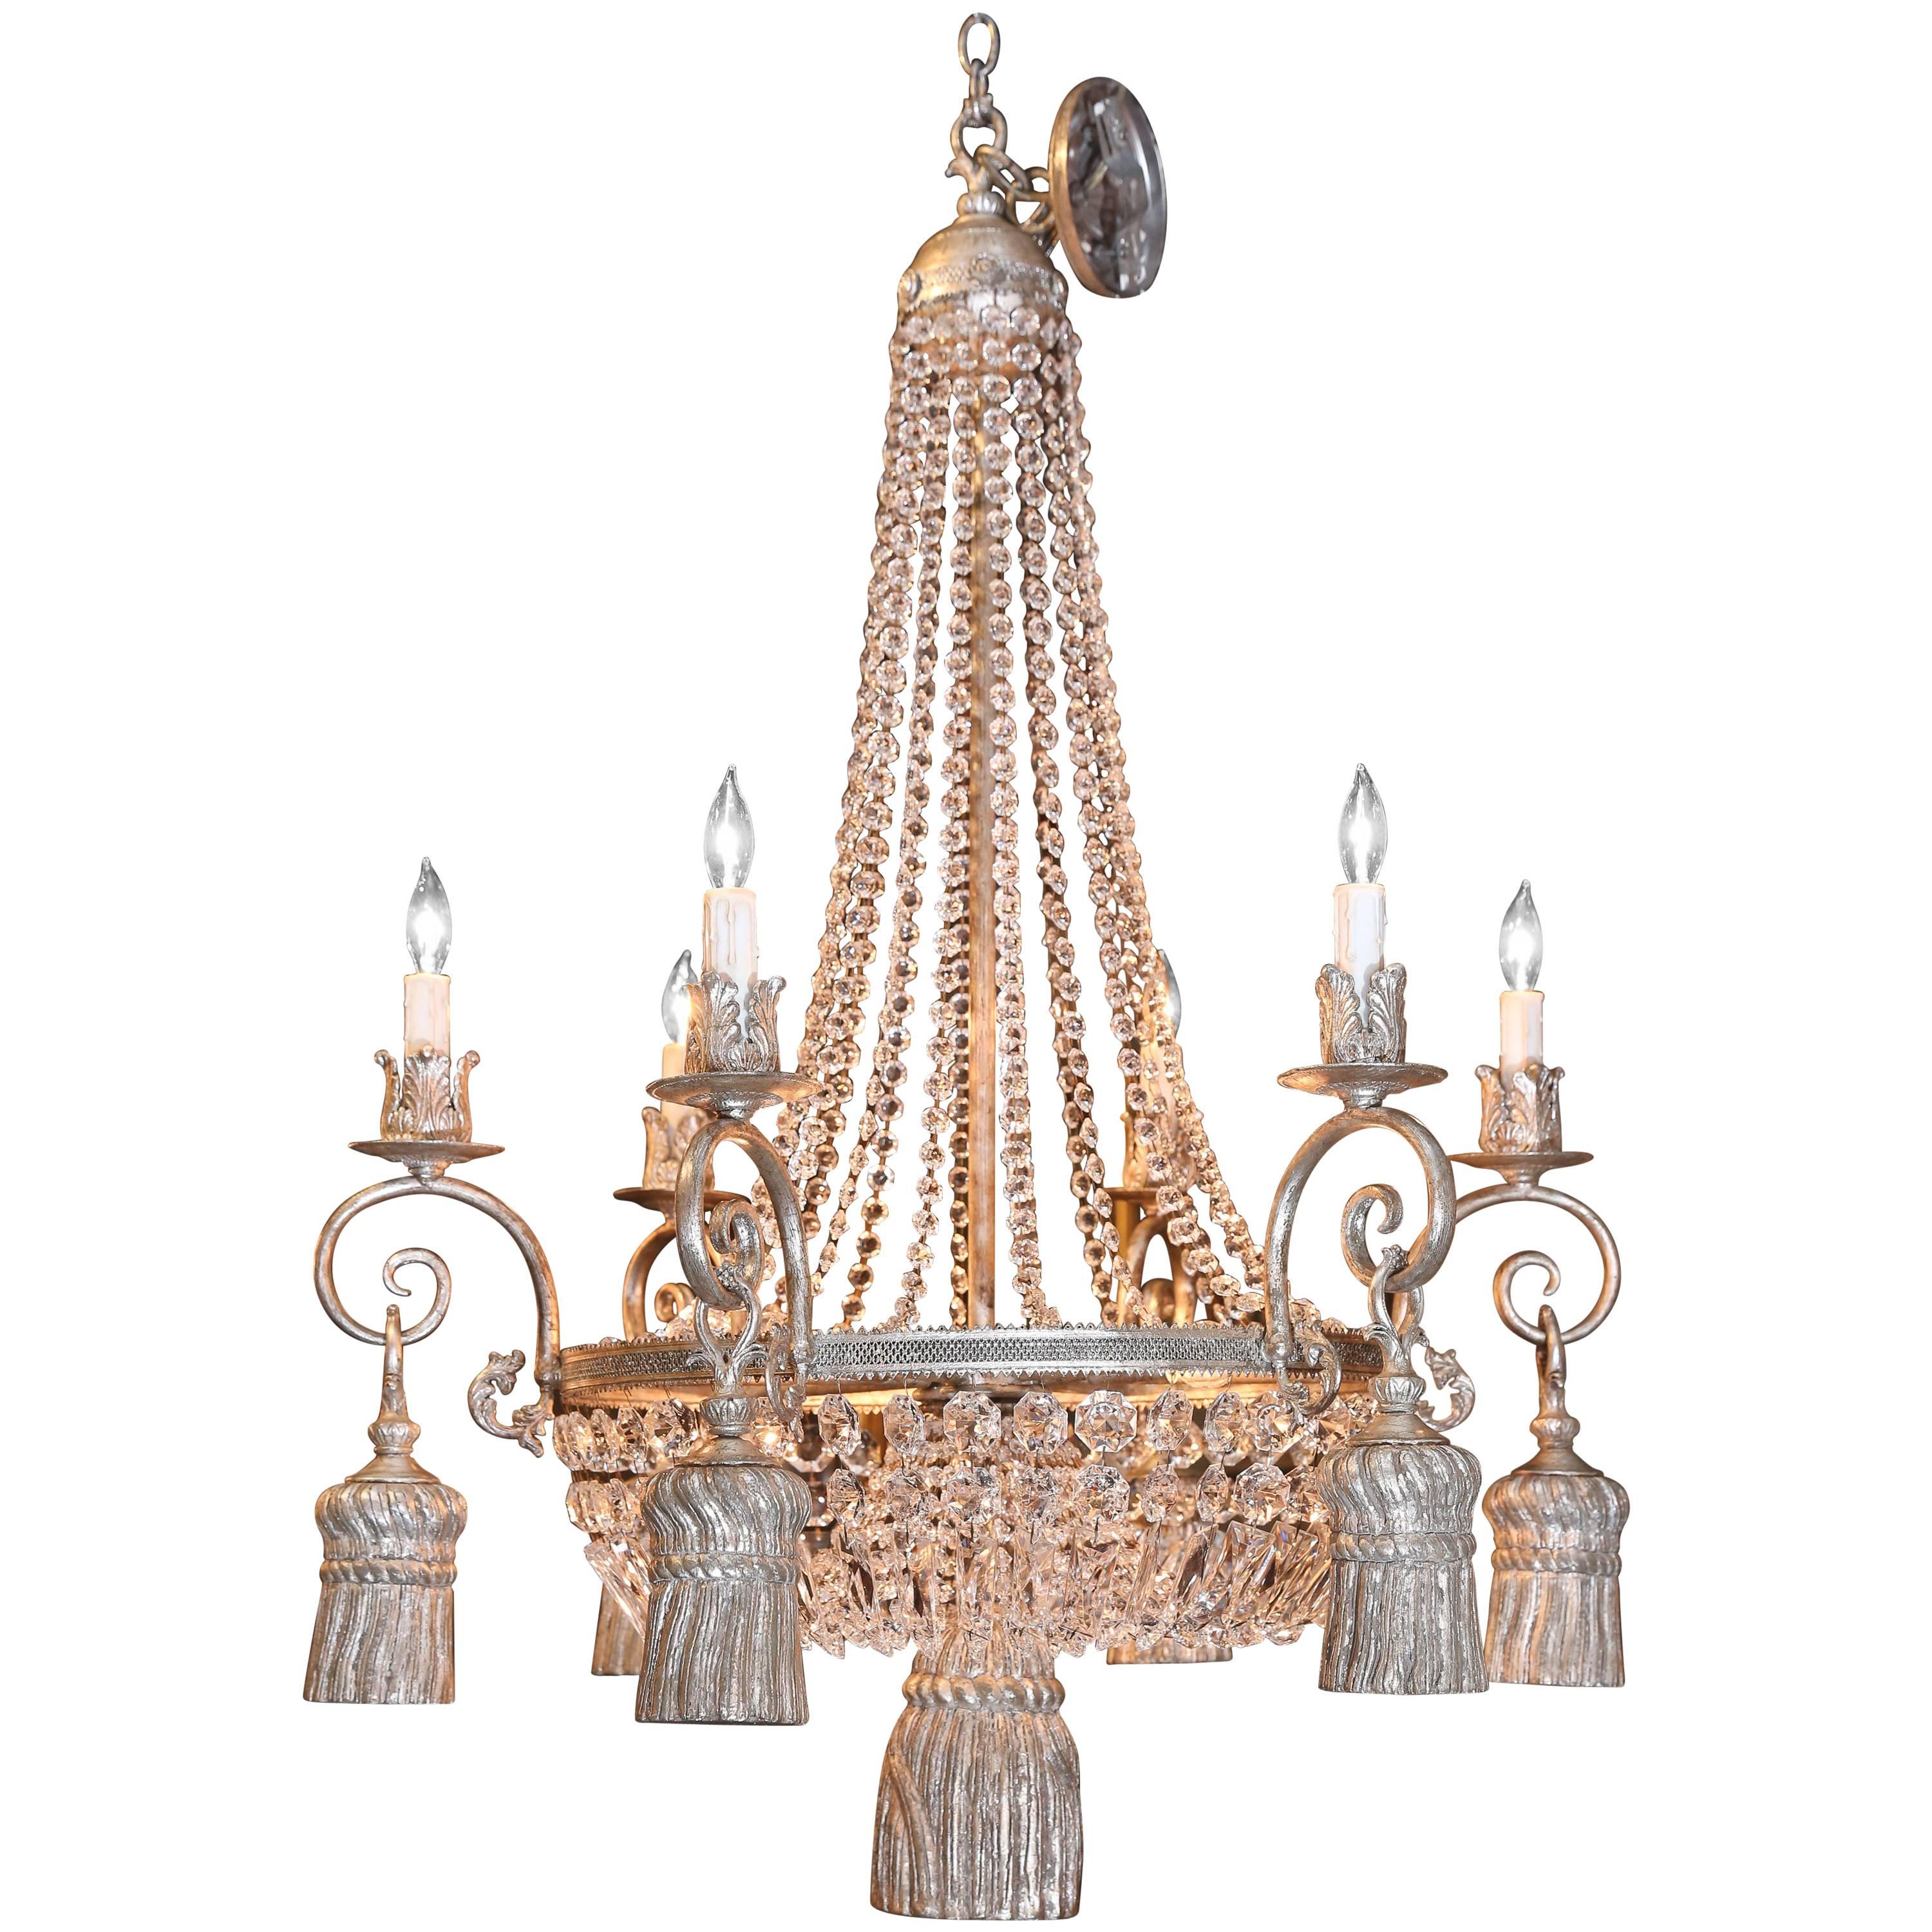 Six-Light Empire Style Chandelier with a Silver Finish For Sale